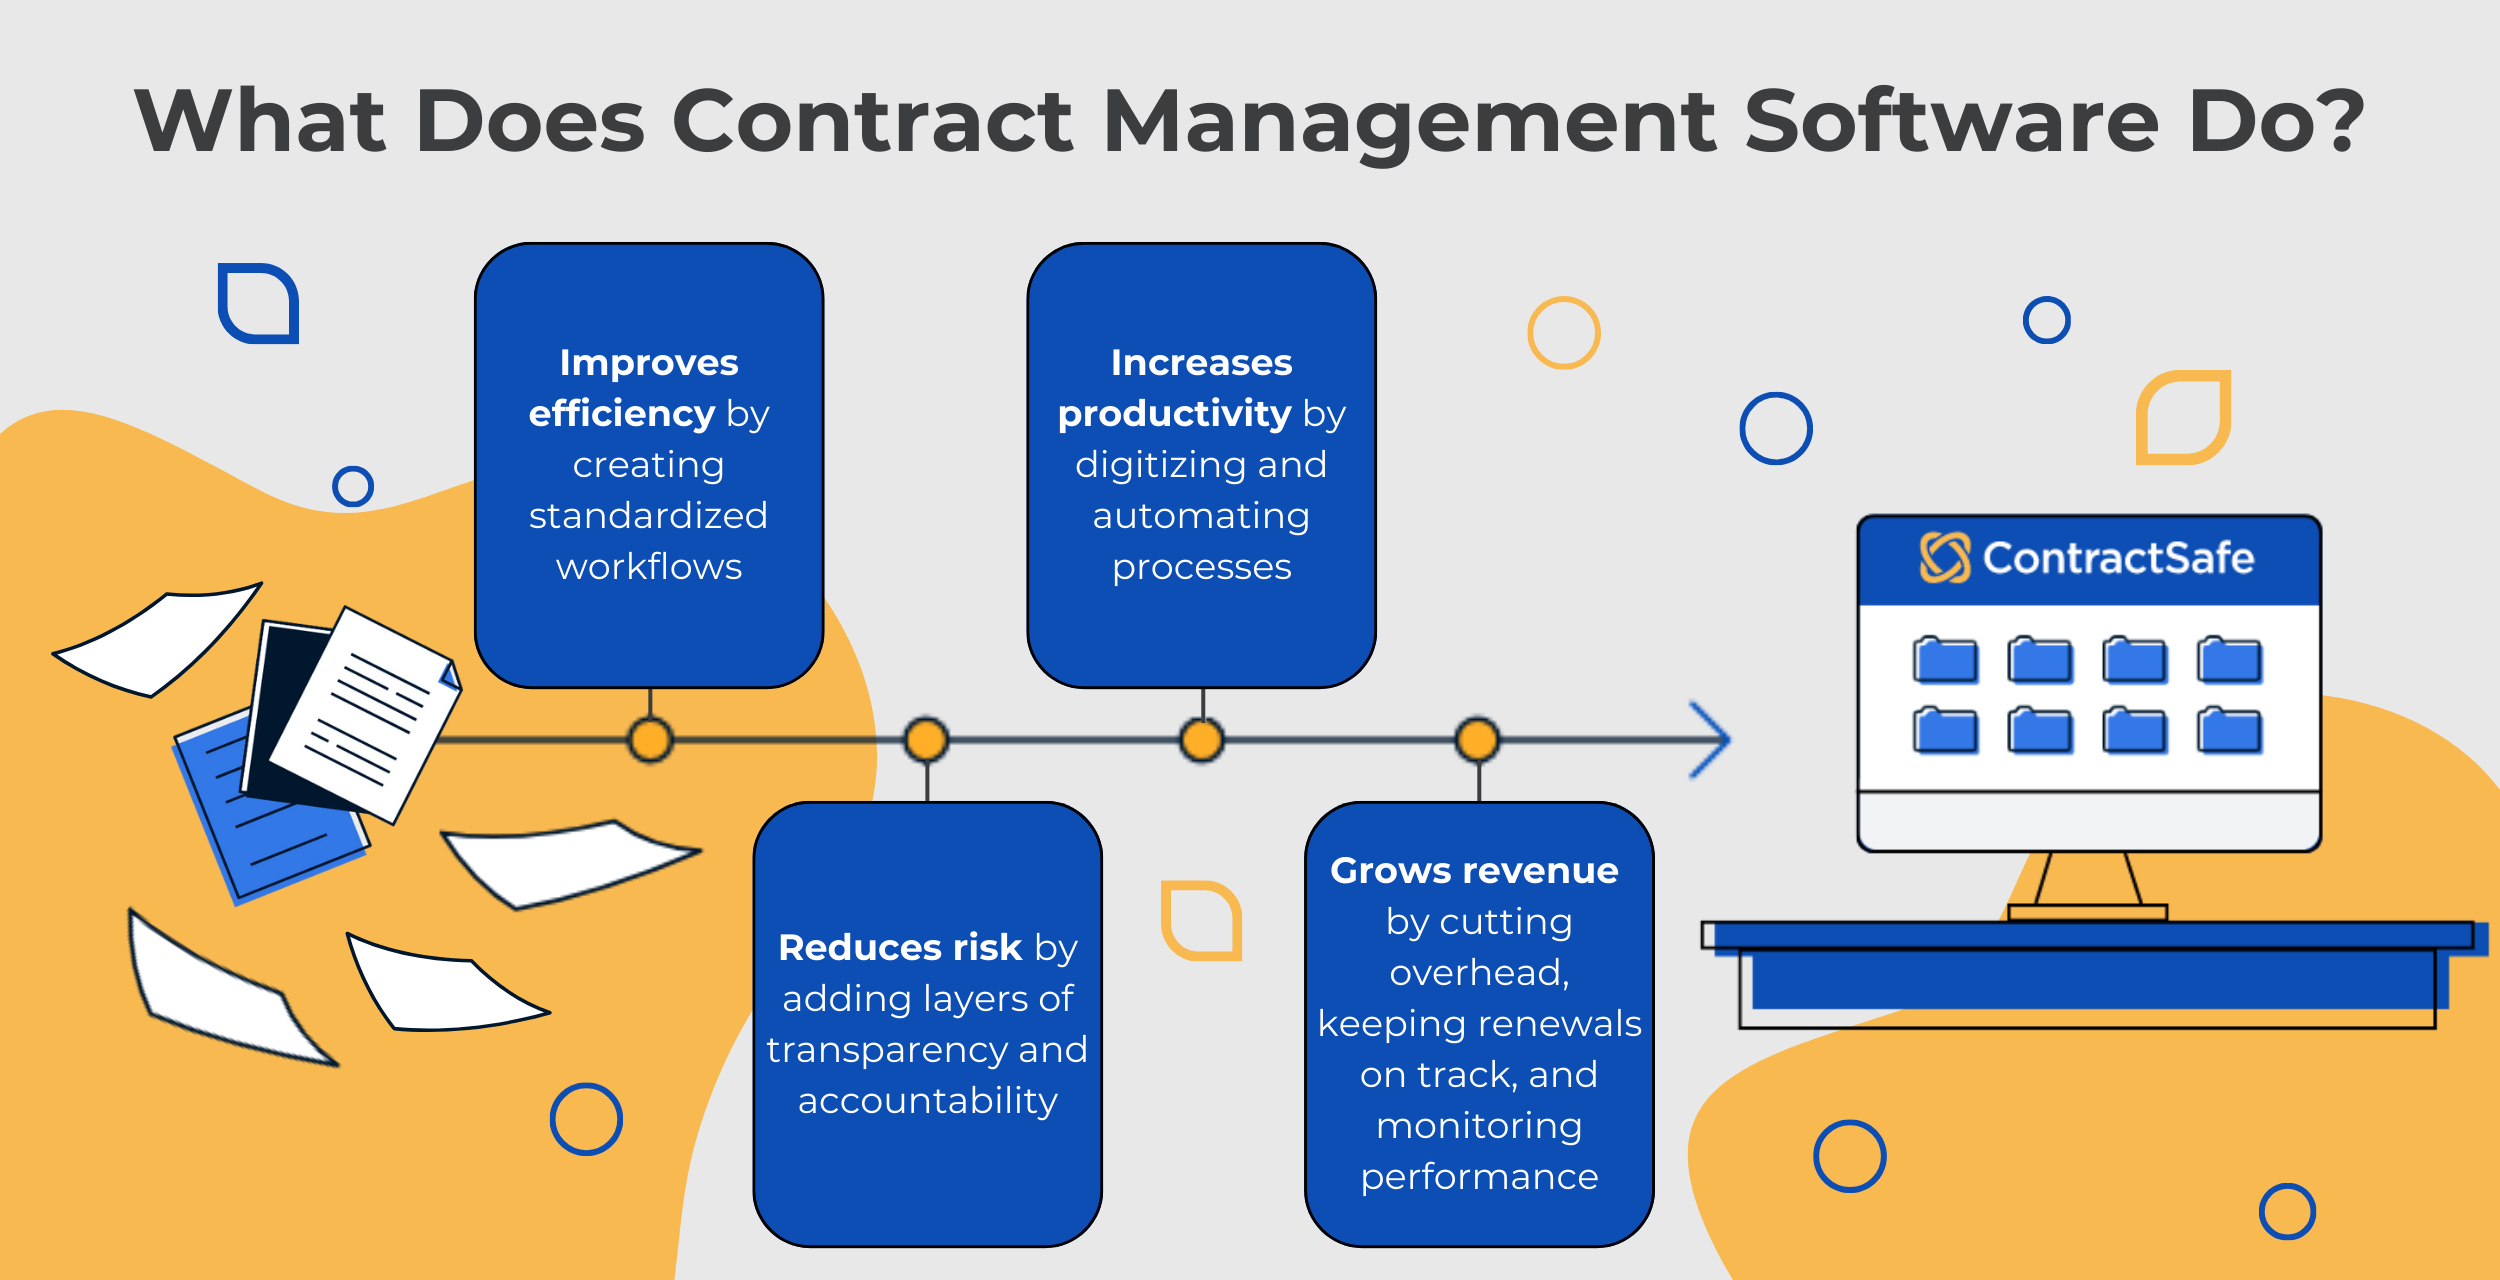 What Does Contract Management Software Do